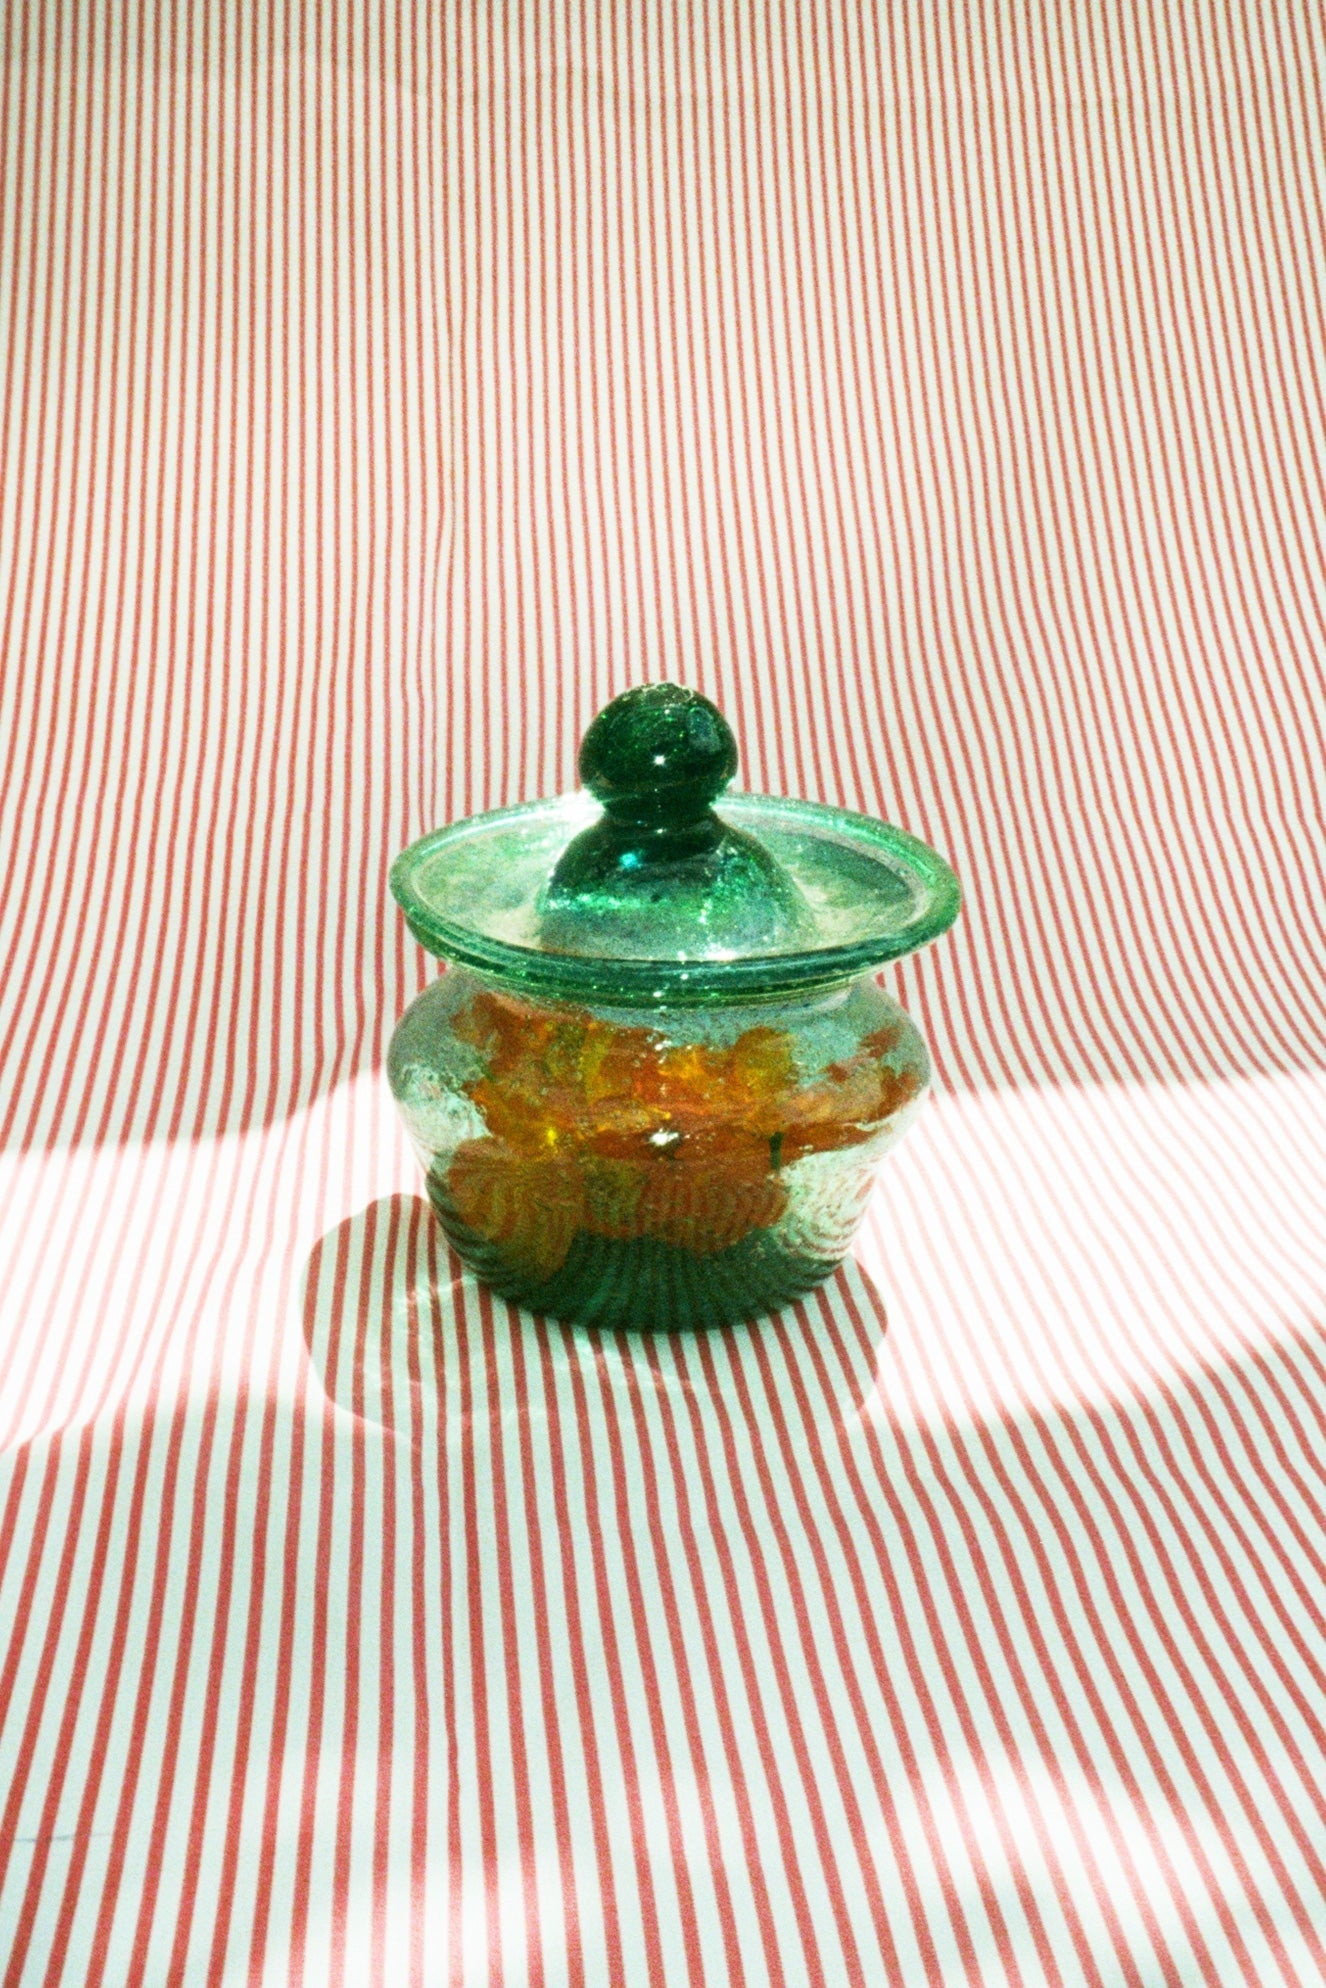 AFGHAN GLASS SWEETS BOWL IN TEAL - 100% SILK SHOP